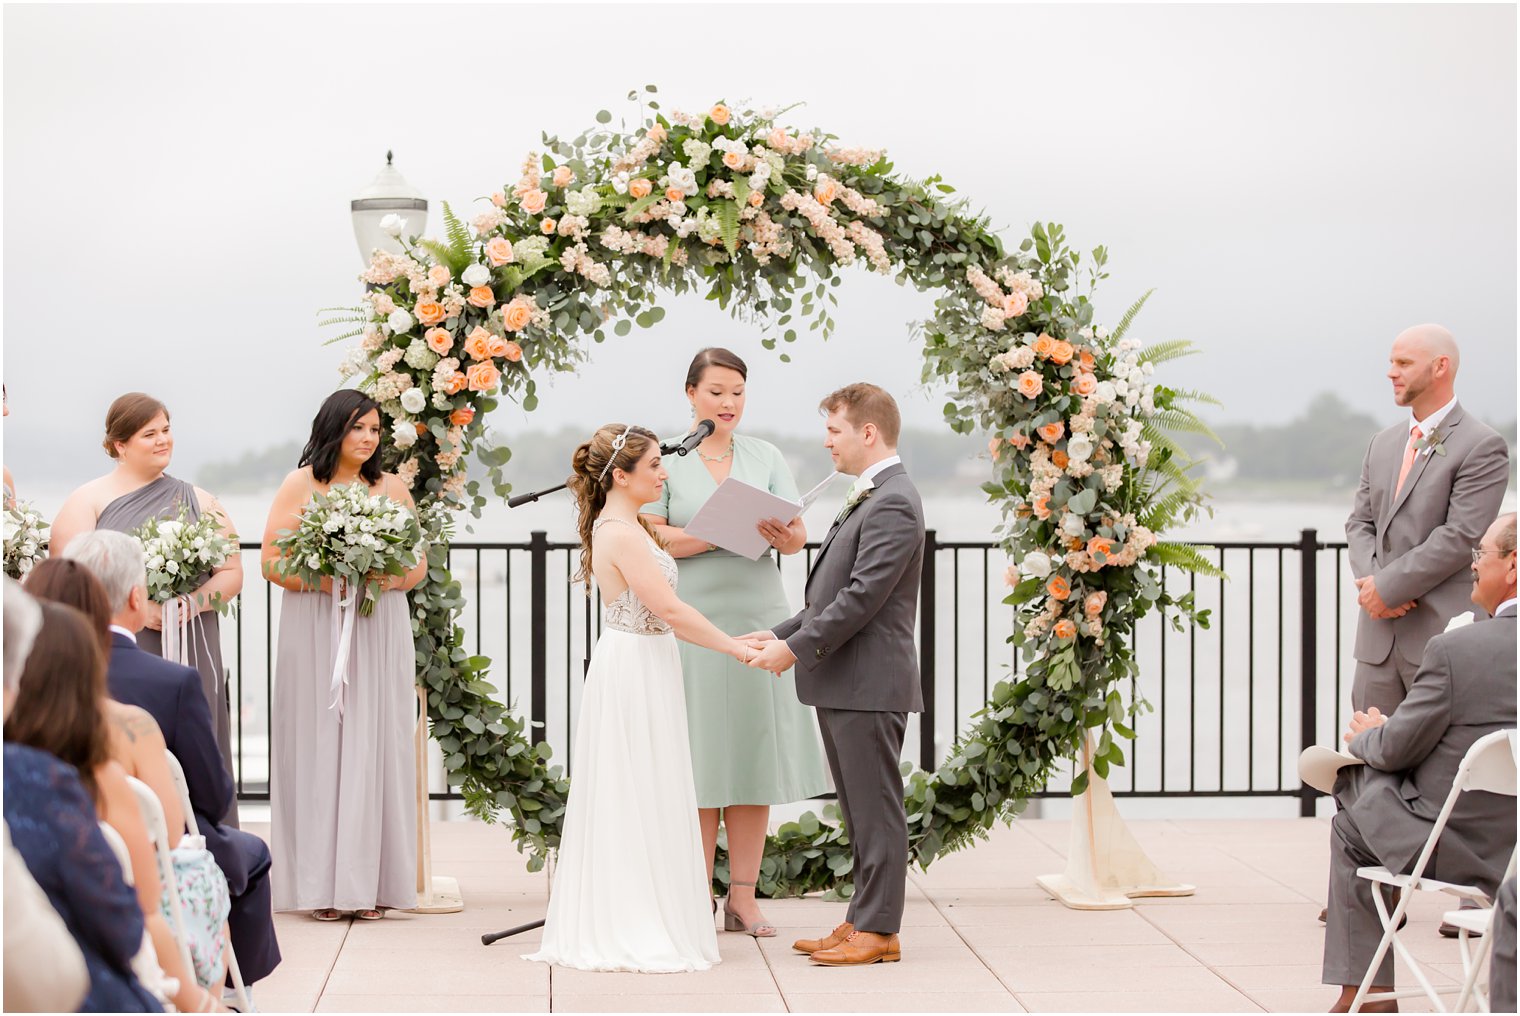 Outdoor Molly Pitcher Inn Wedding Ceremony